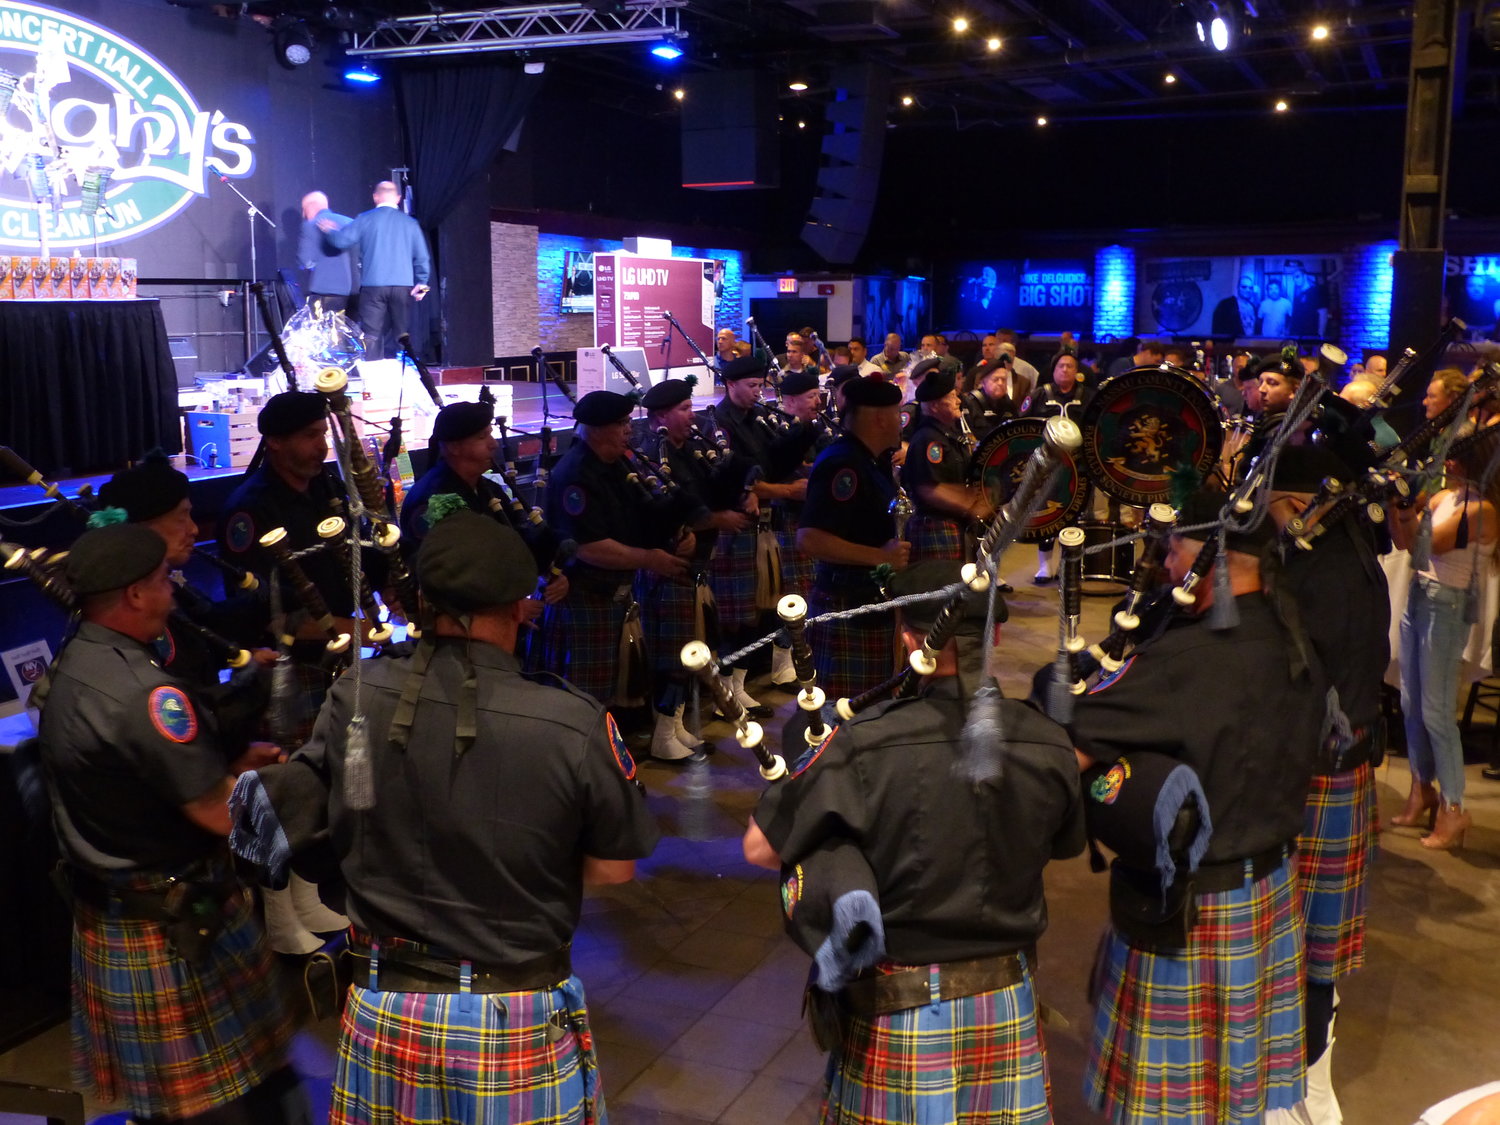 The Nassau Police Department Pipe Band performed “Amazing Grace” to start the ceremony.